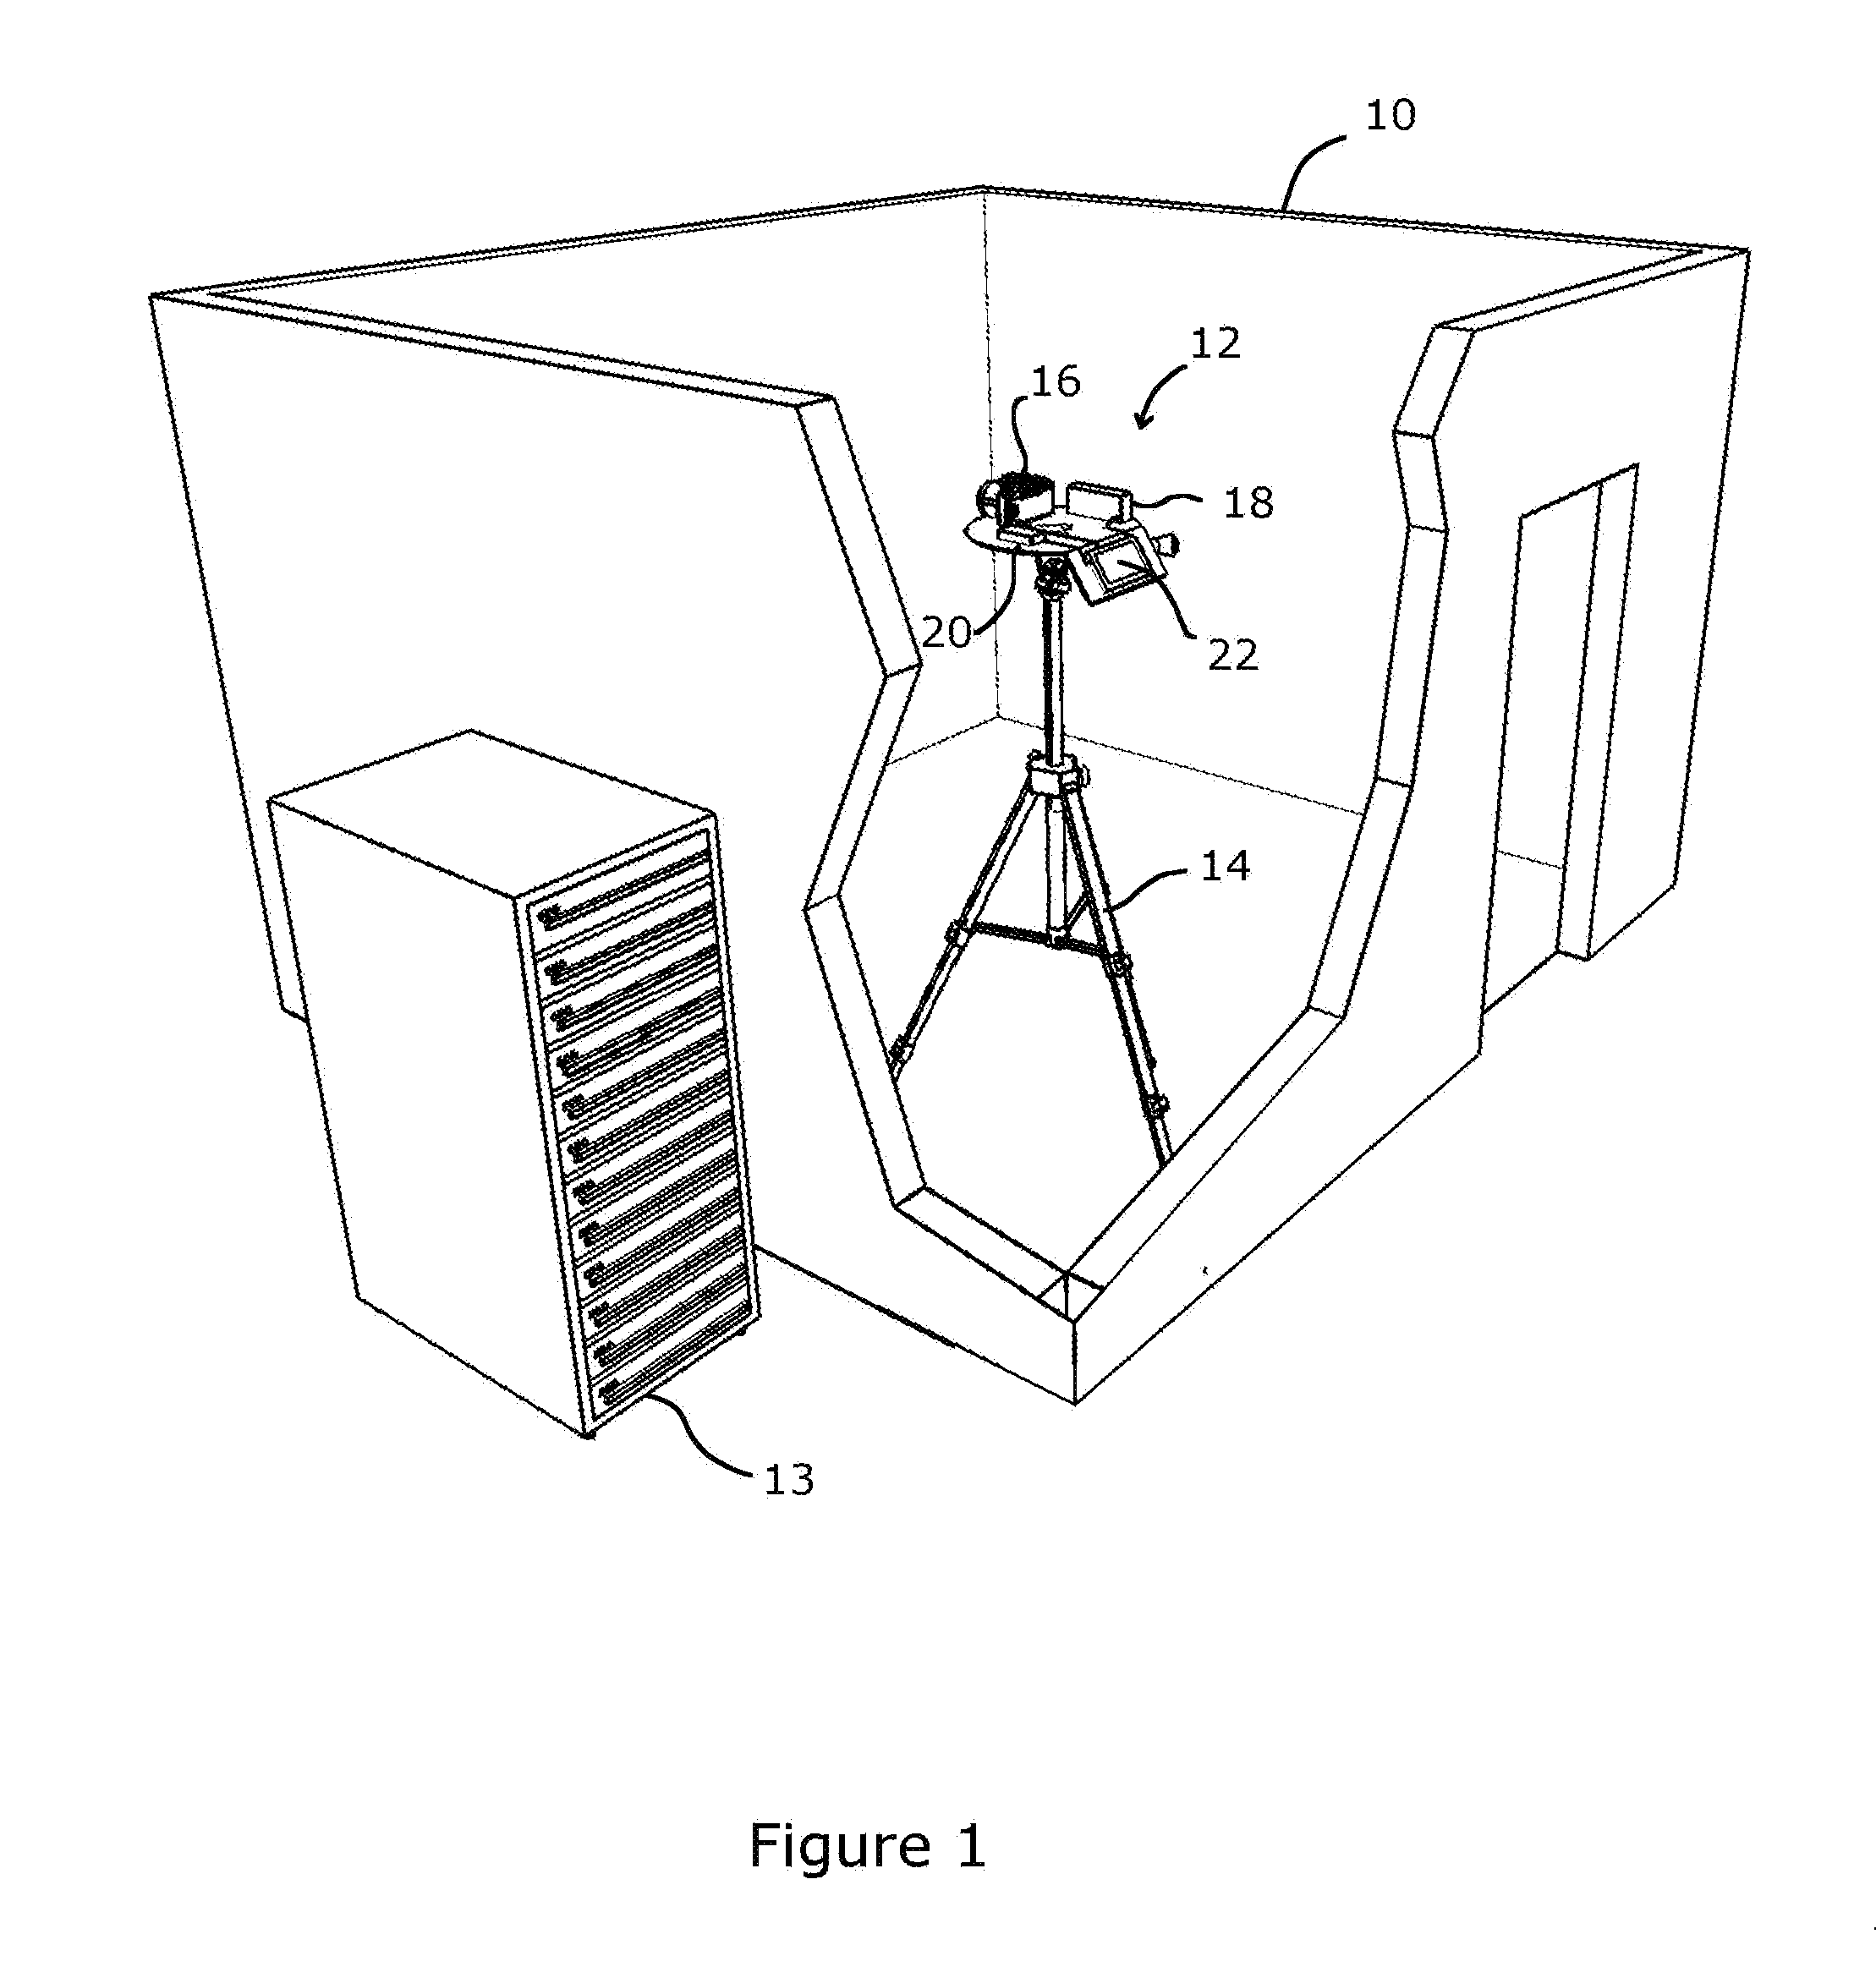 Apparatus and Method for Spatially Referencing Images